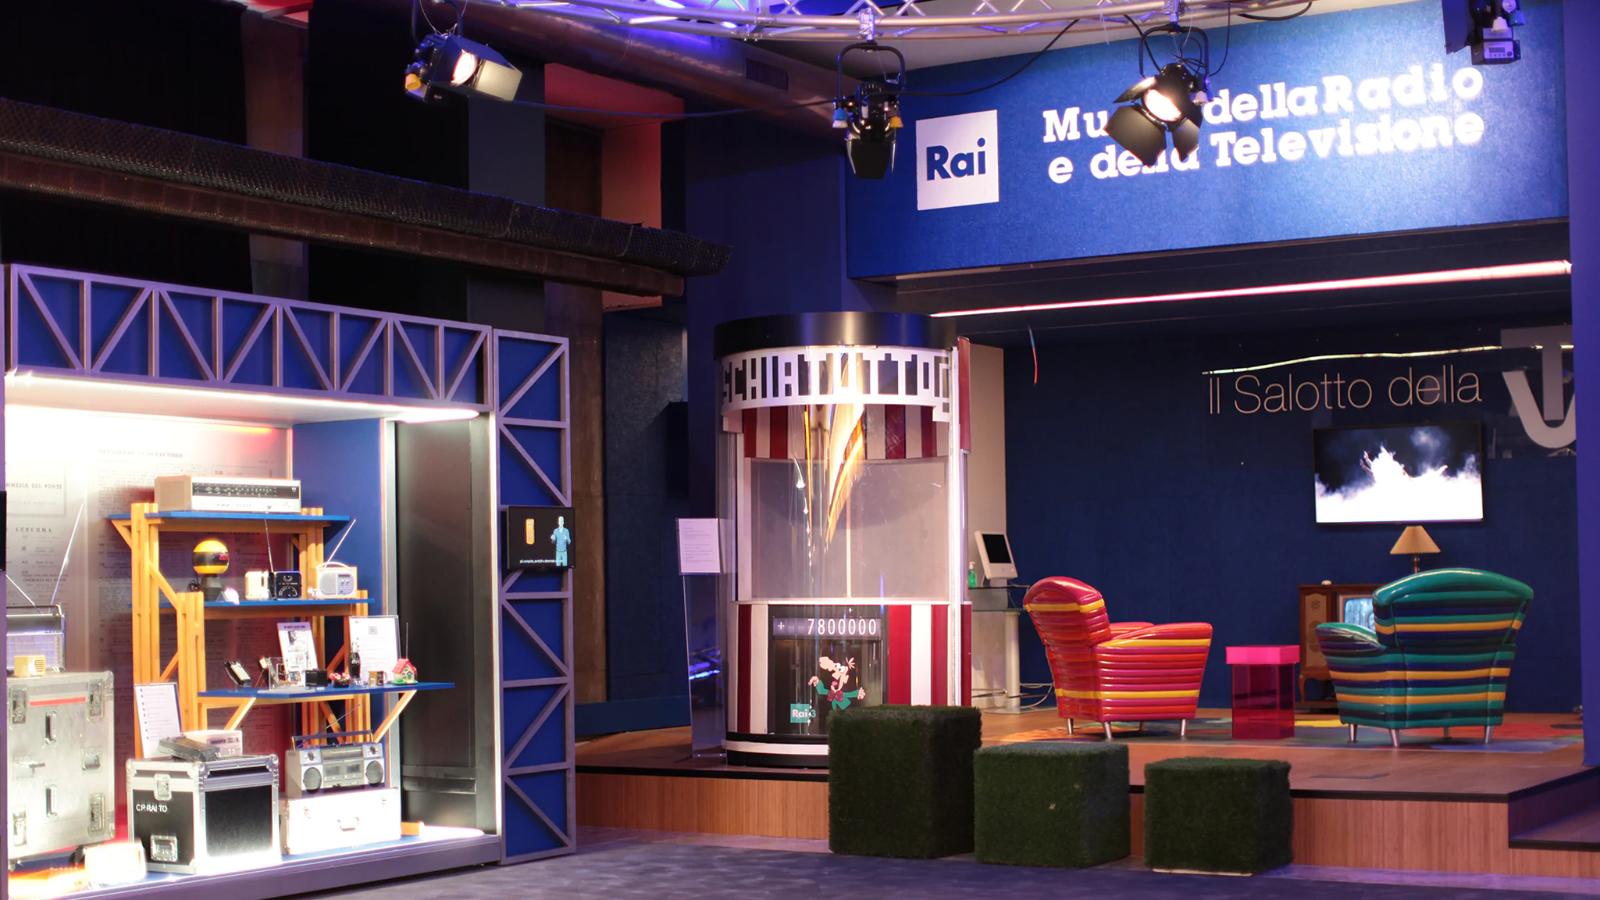 Museum of the Radio is of the Television RAI